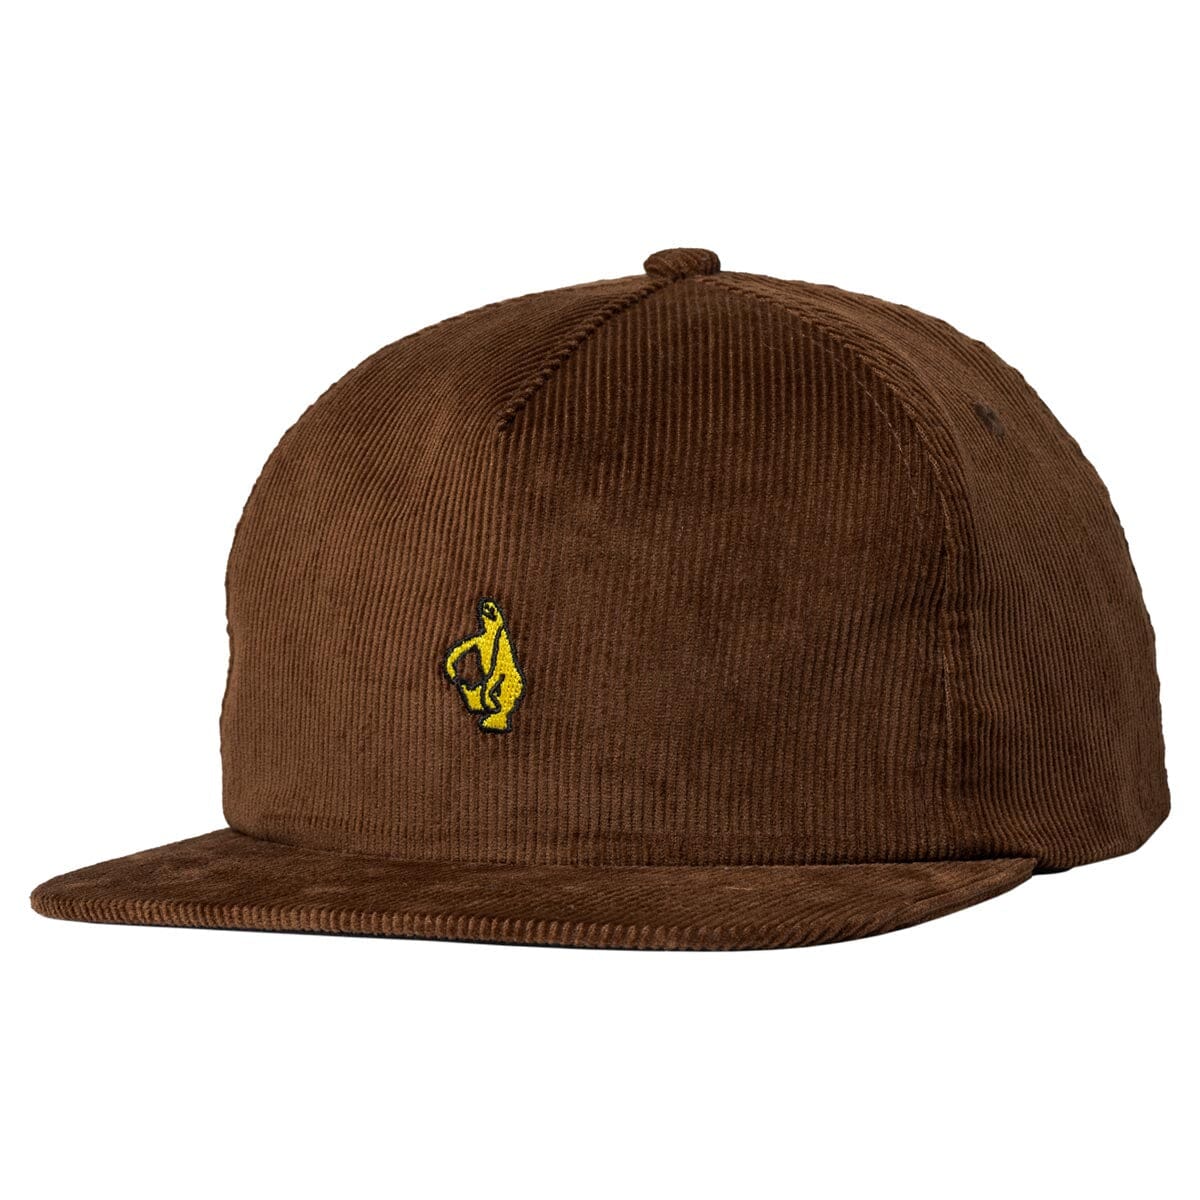 Krooked Shmoo Snapback Hat Brown/Gold hats Krooked 